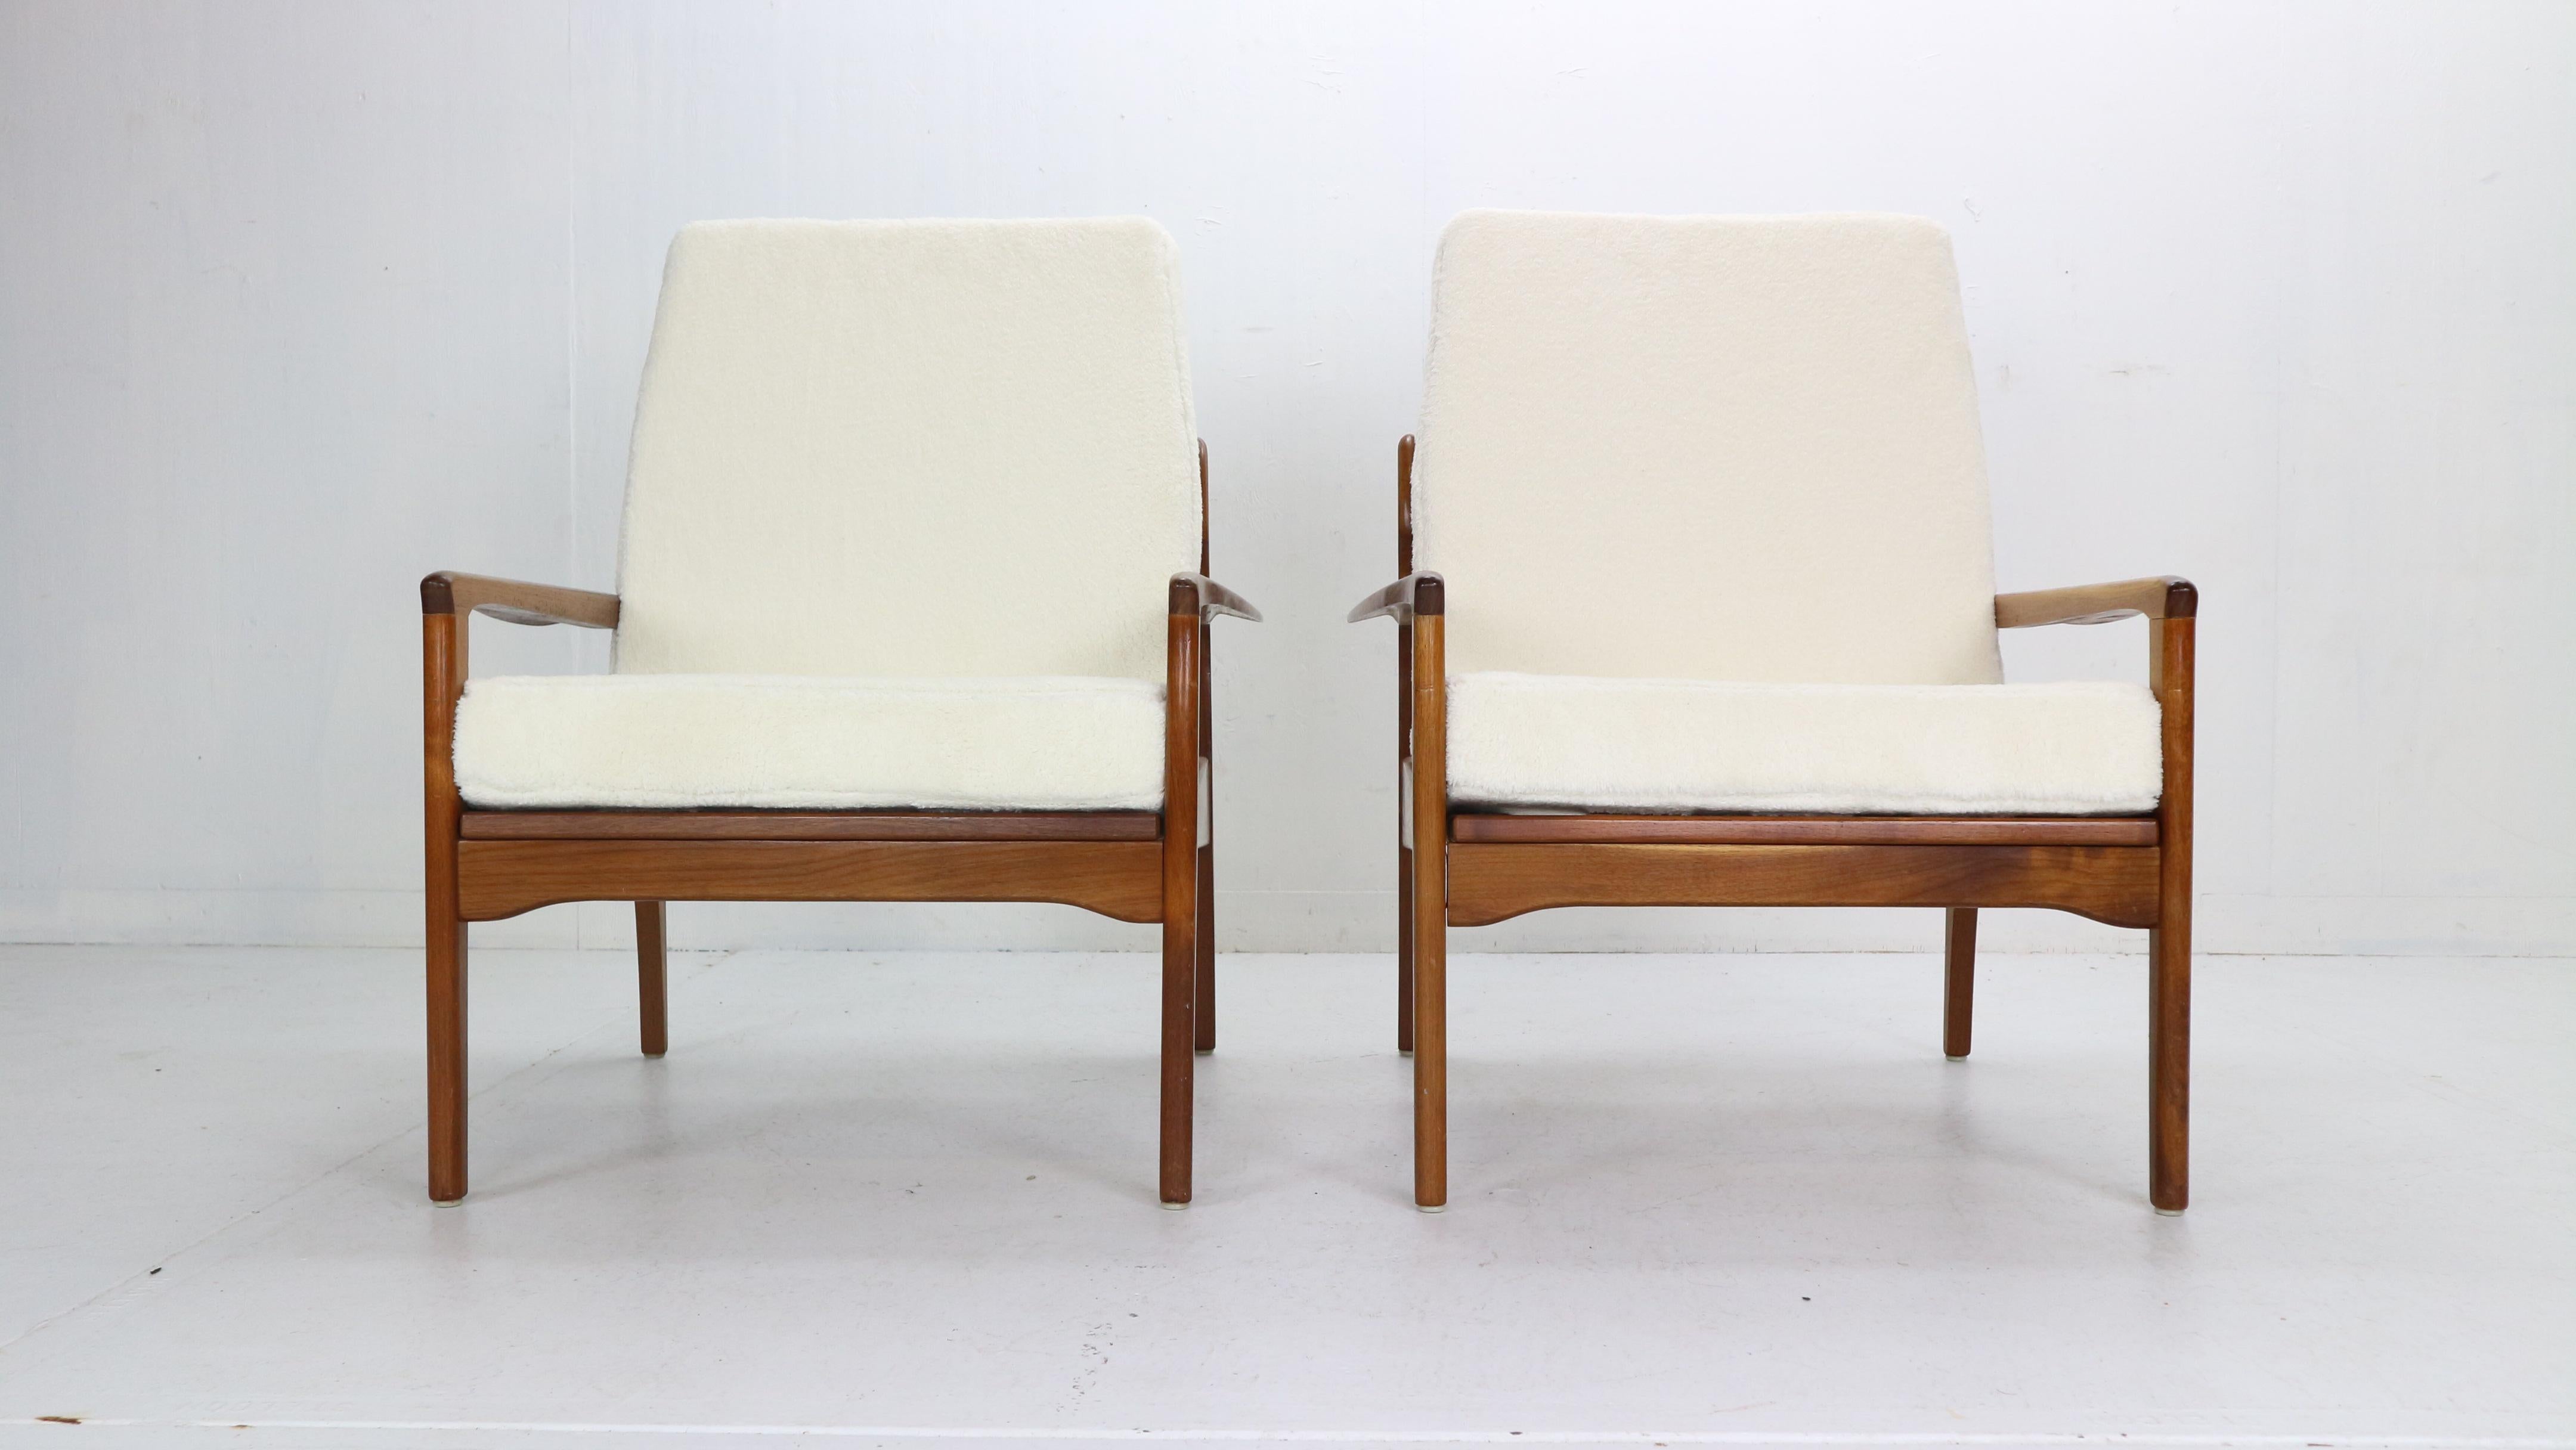 A stunning set of two armchairs by the iconic Fred Lowen, for Fler furniture, circa 1960.
Beautifully finished timber-frames which are rarely seen anymore because they require hours of careful work (much by hand) are made of Tasmanian